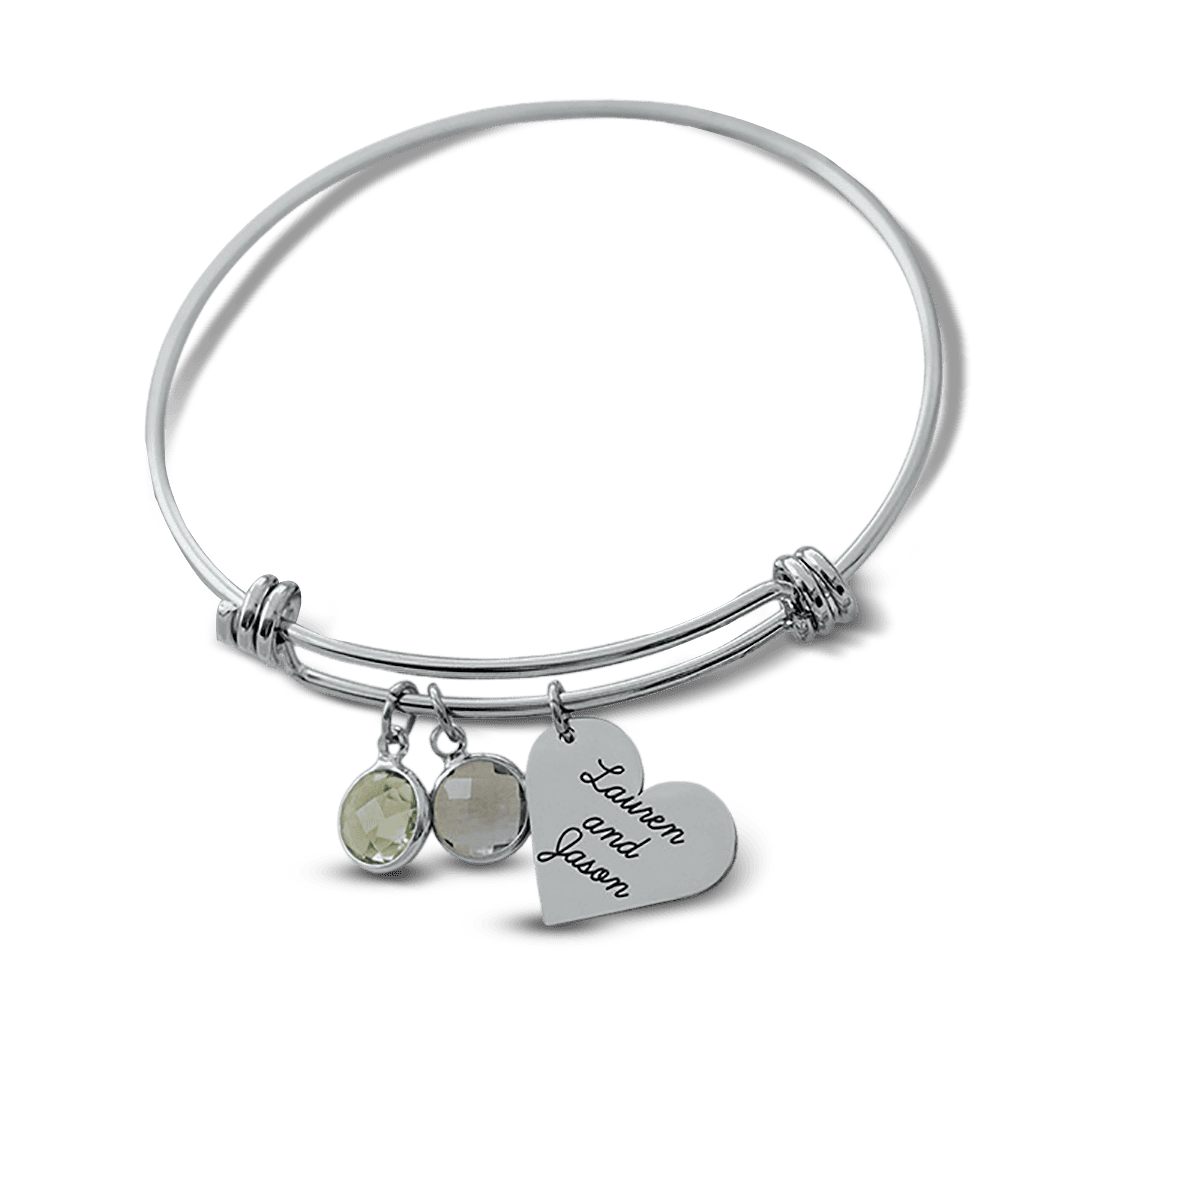 Personalized Birthstones Engraved Charm Bangle Bracelet - Stainless Steel